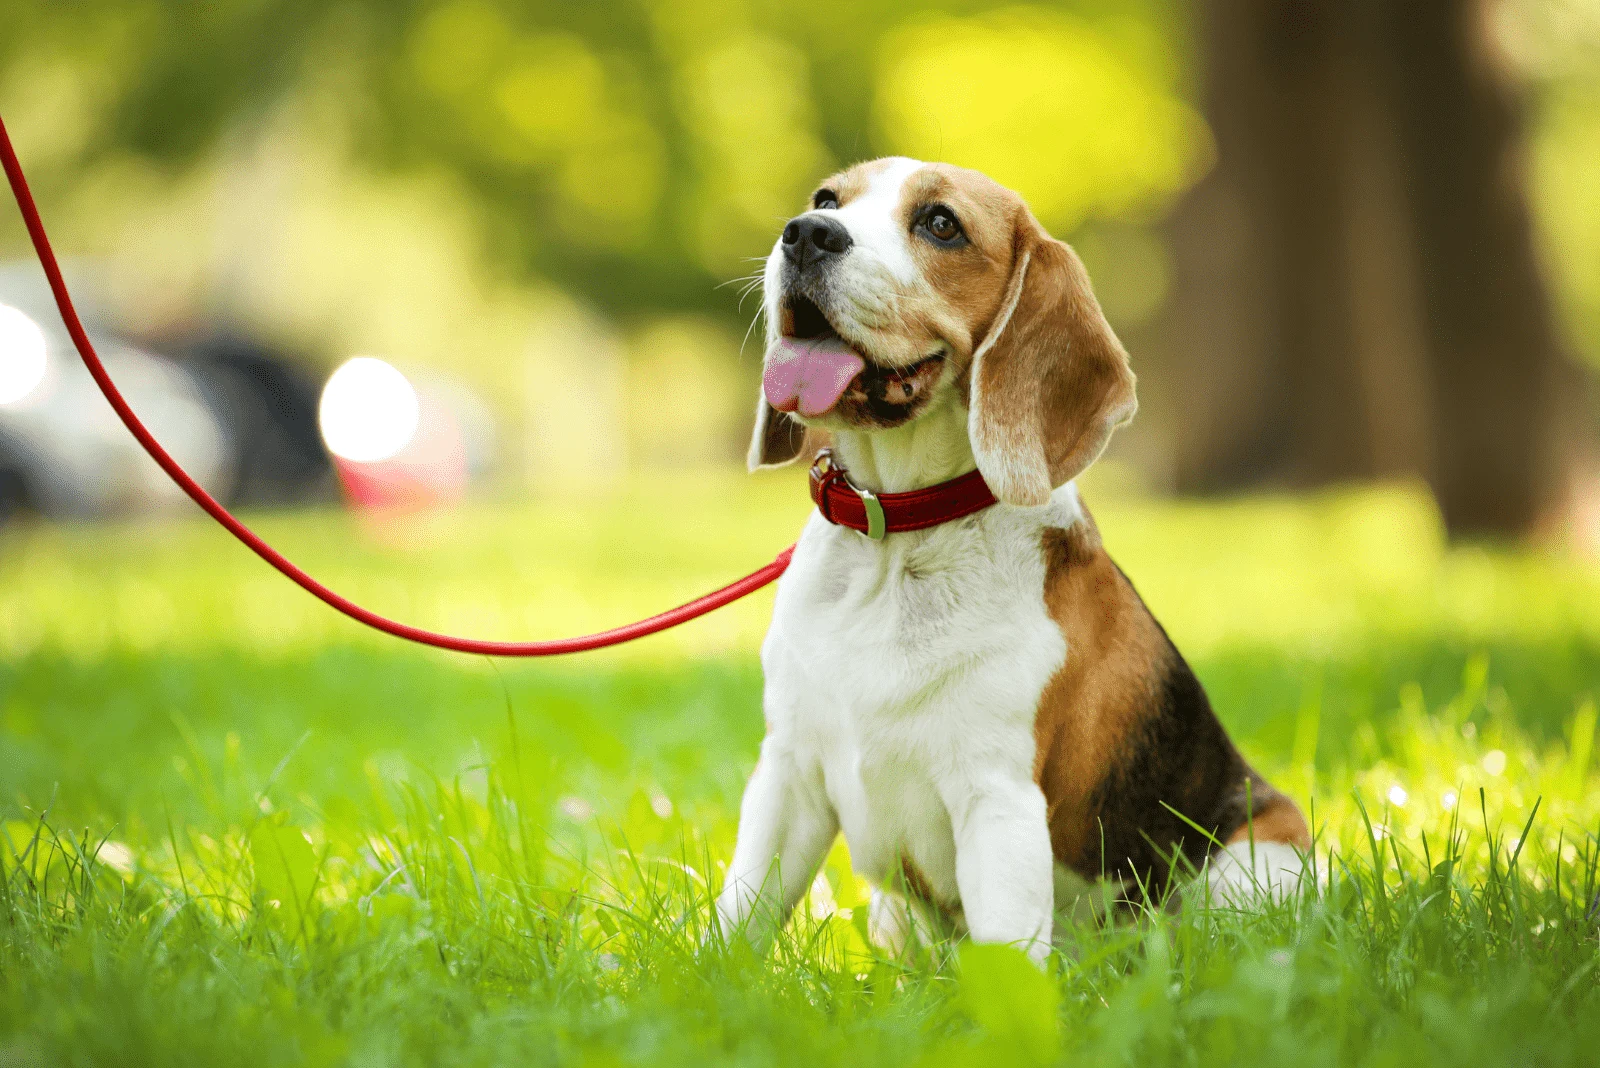 Beagle sits with a leash on the grass